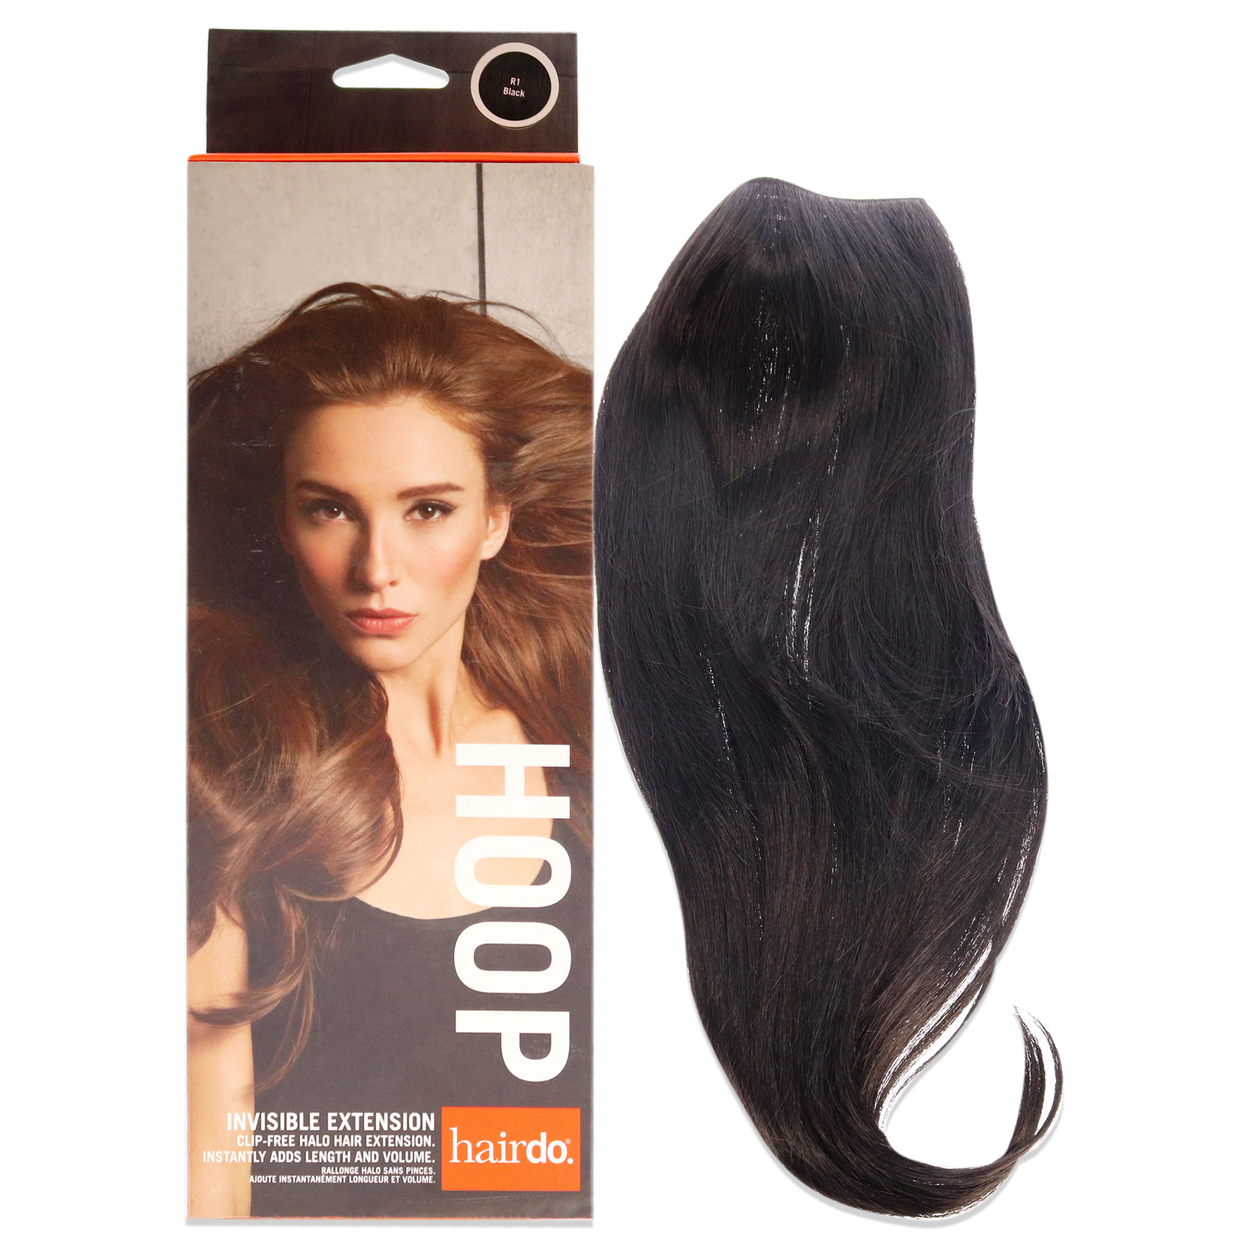 Hairdo Invisible Extension - R1 Black Hair Extension 1 Pc